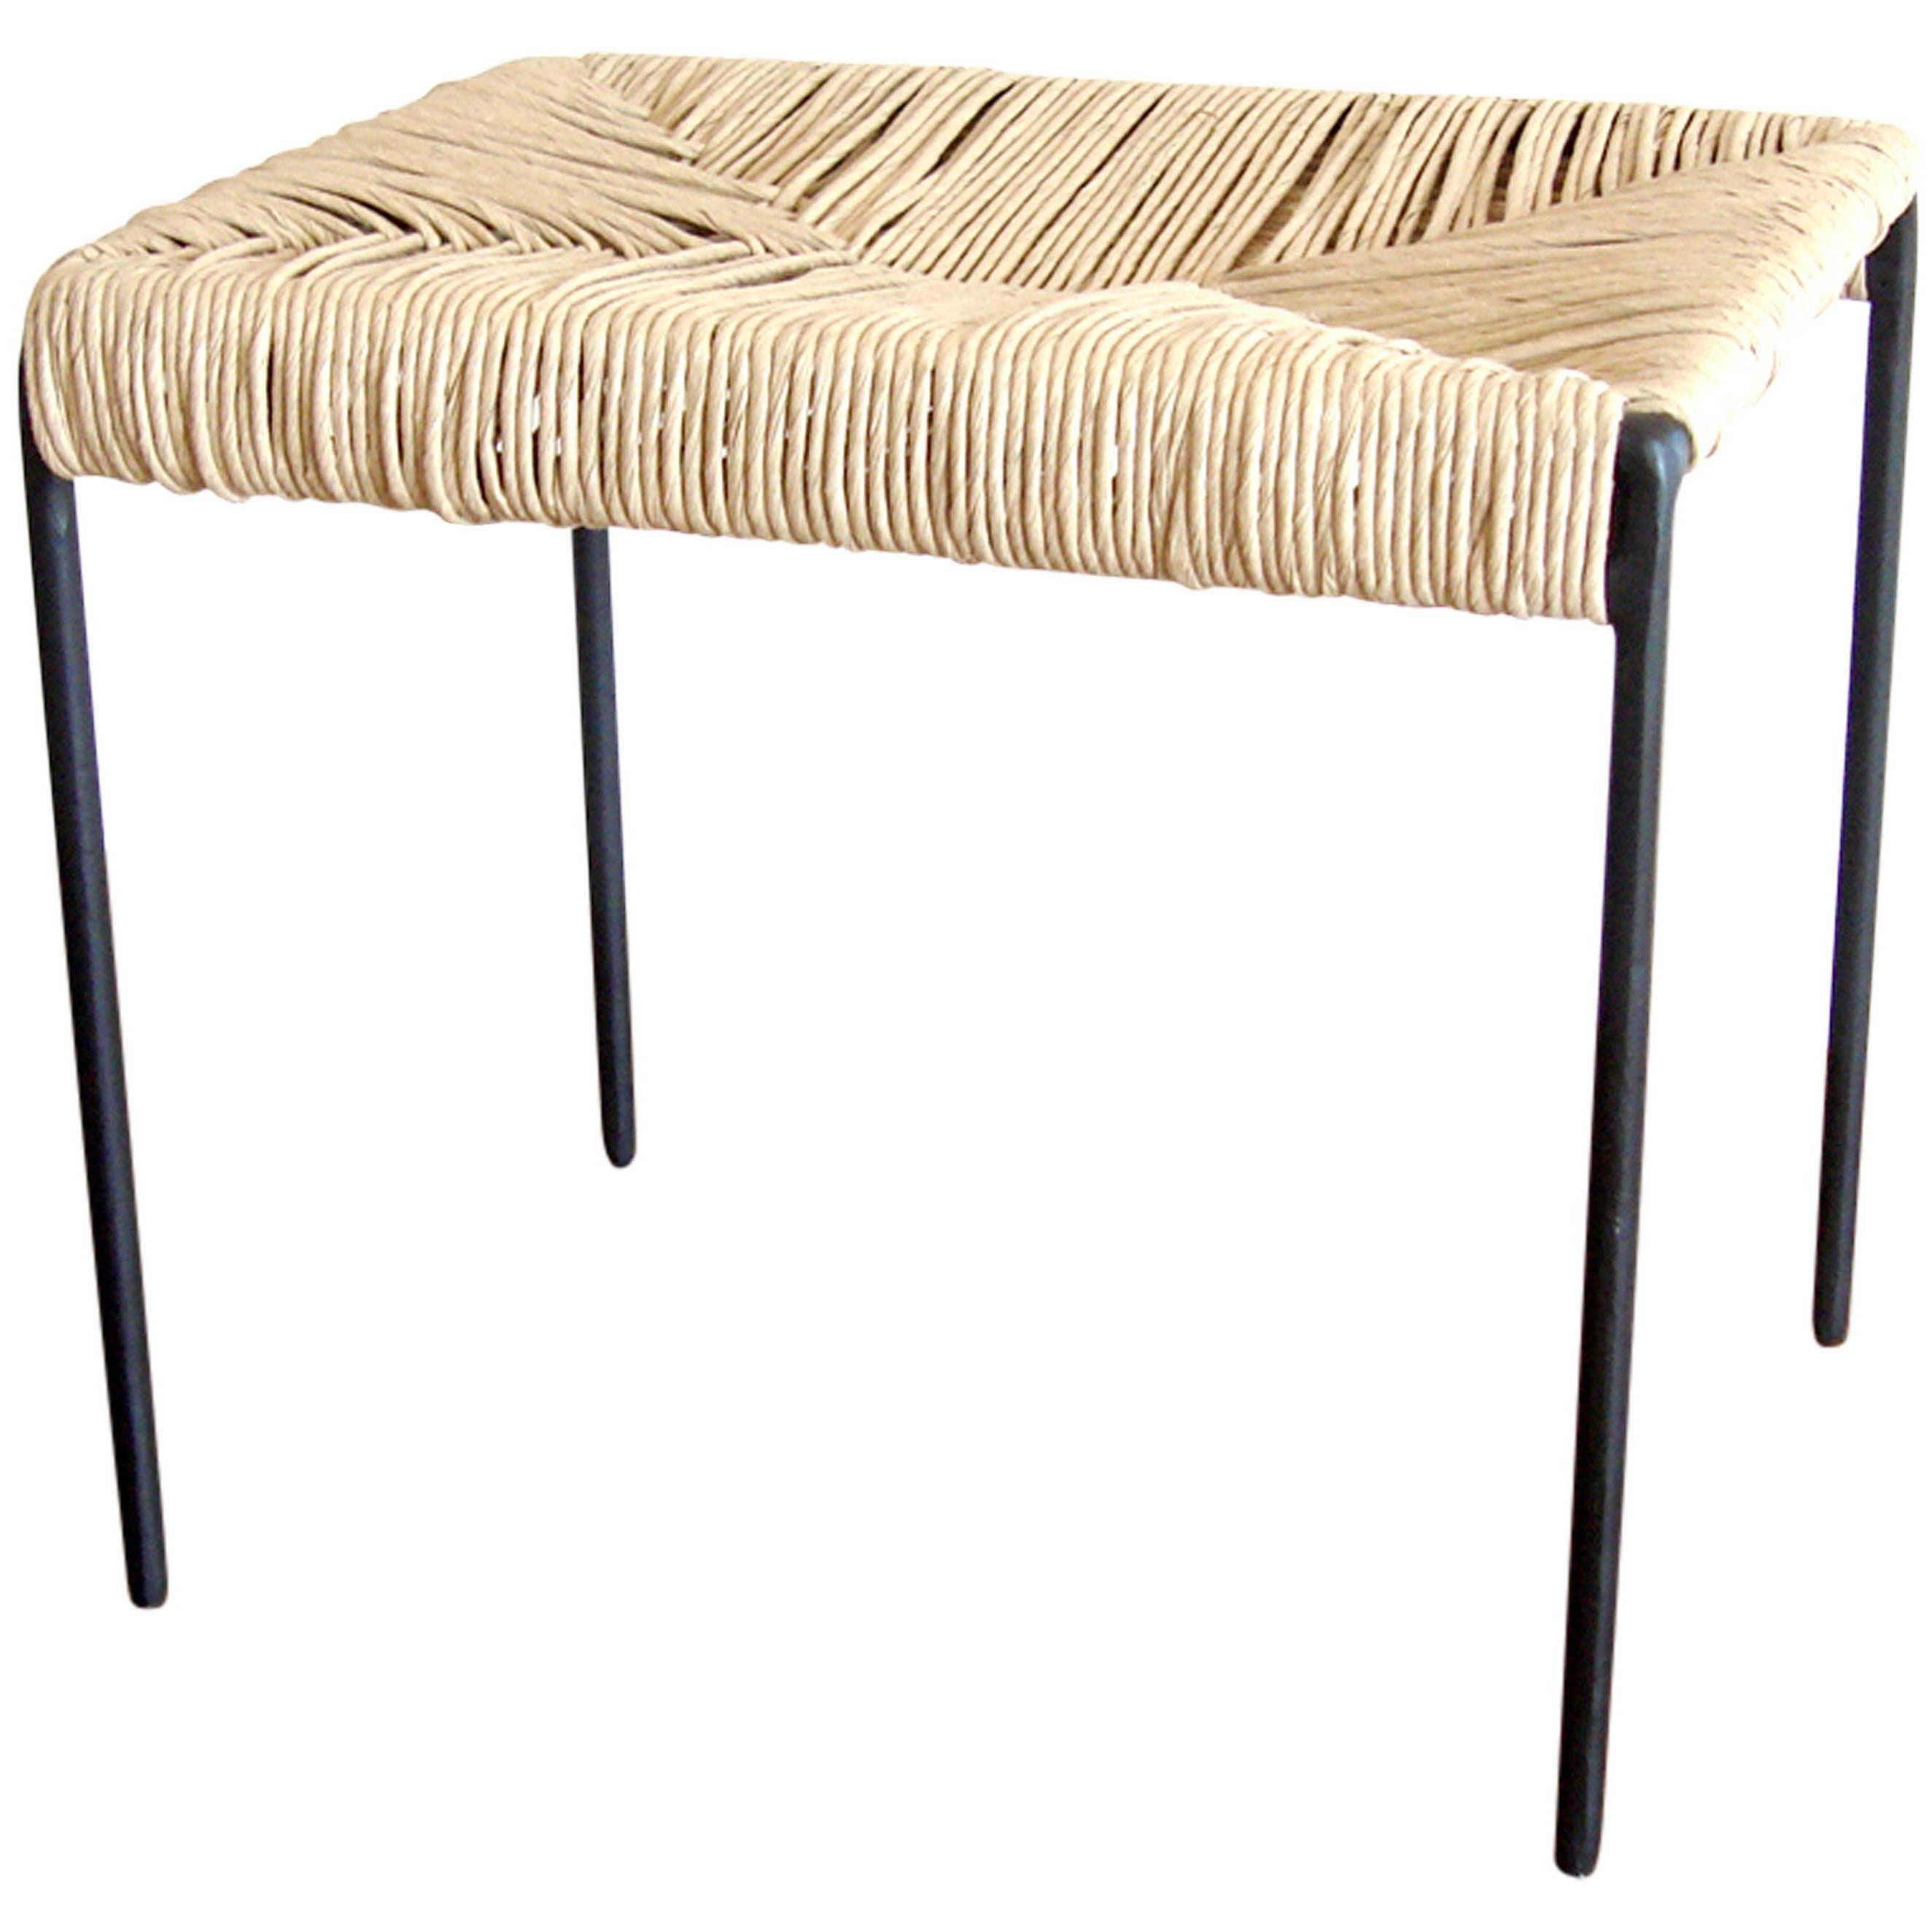 Americano woven cane and blackened steel ottoman stool For Sale